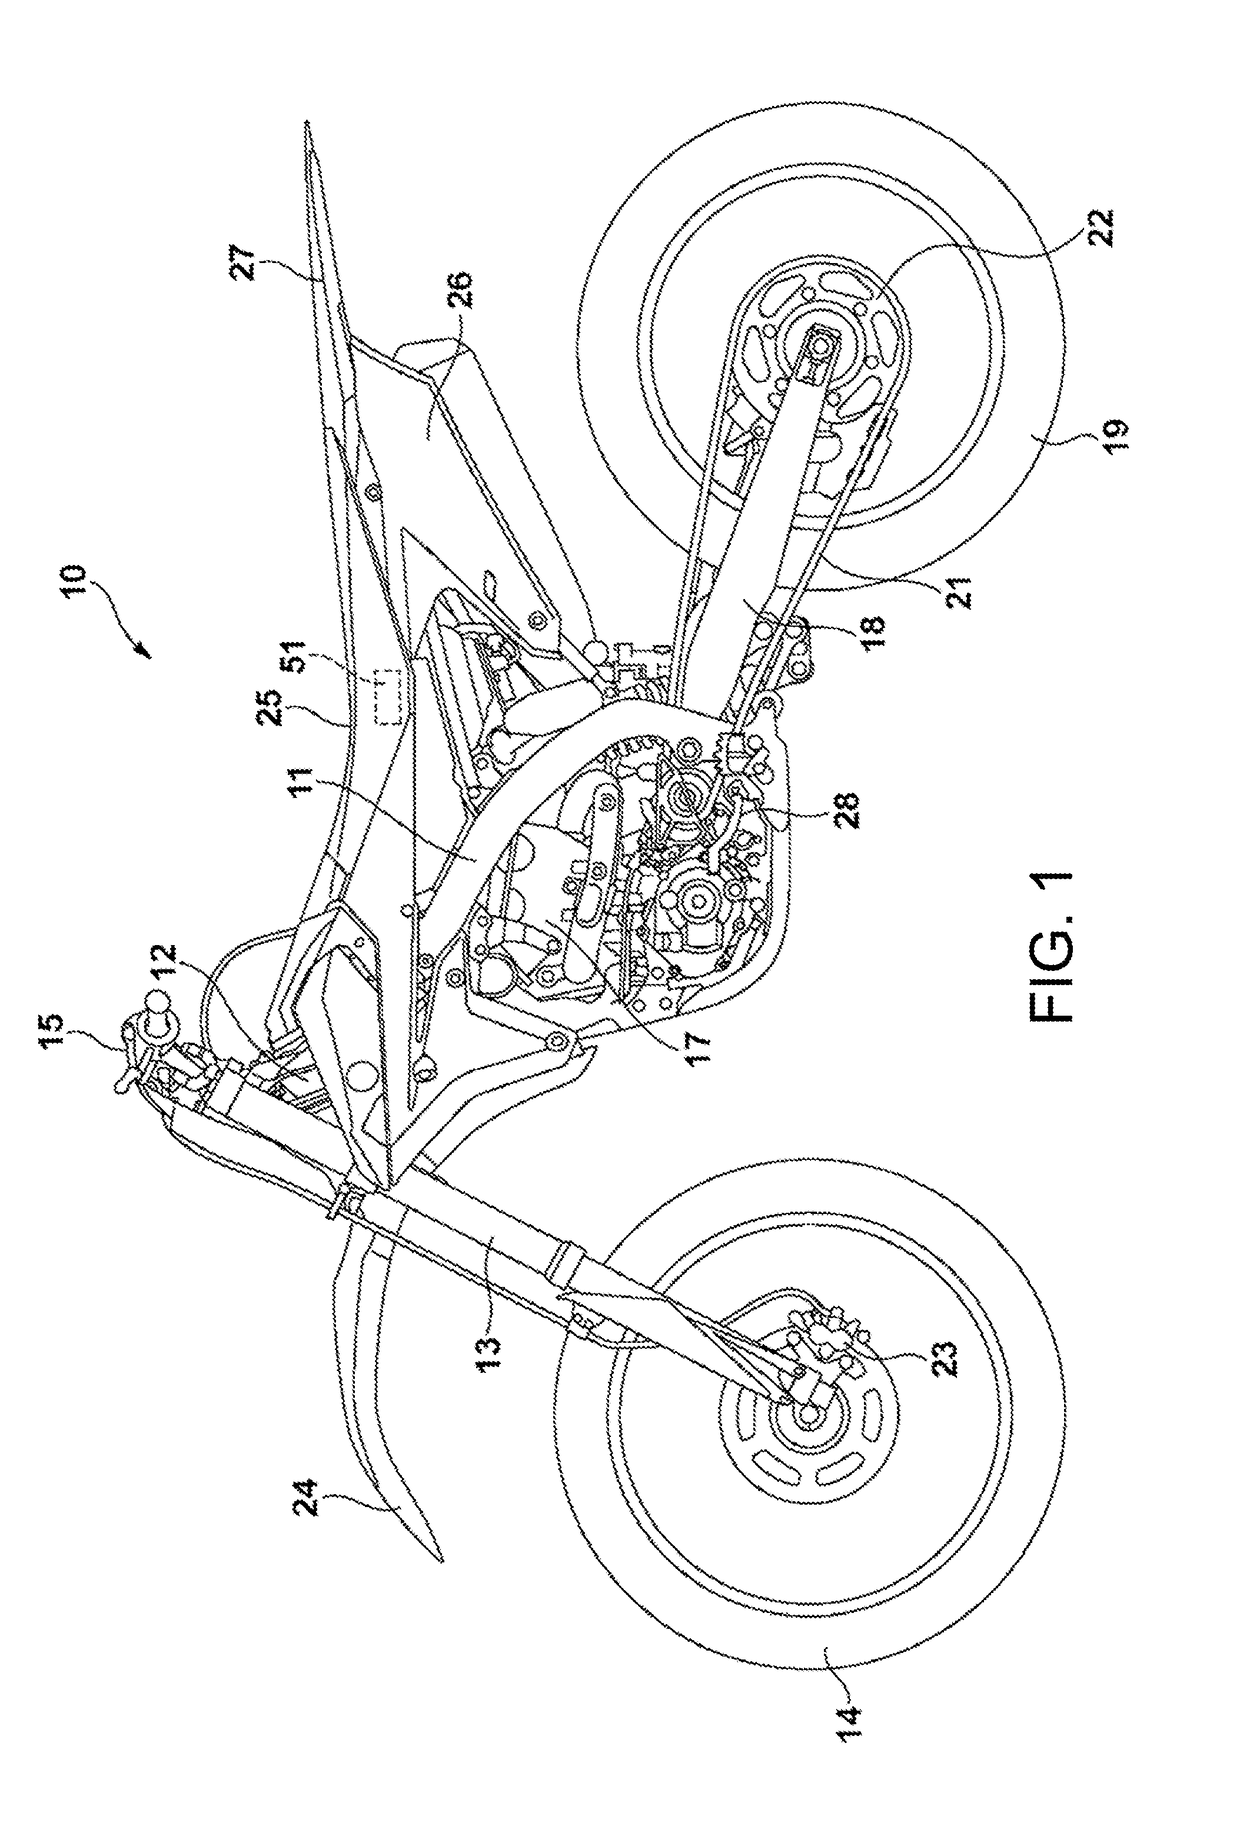 Electricity supply device and vehicle